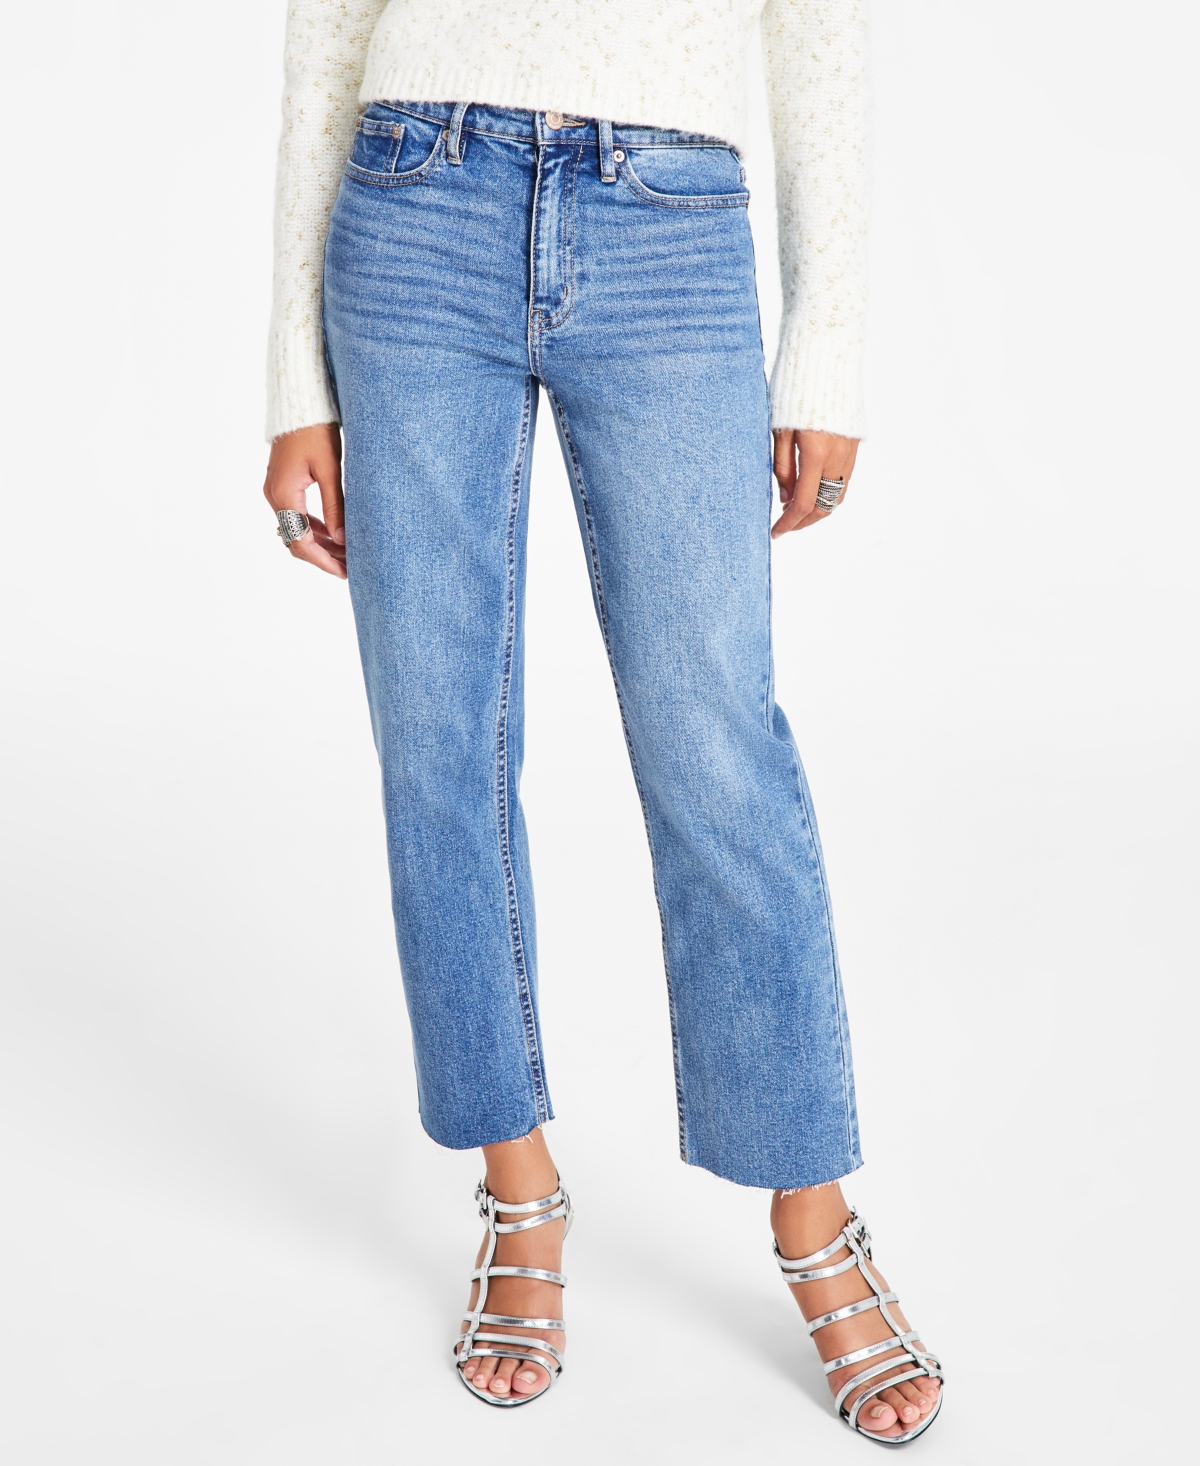 Women's Straight-Leg Ankle Jeans - Nain